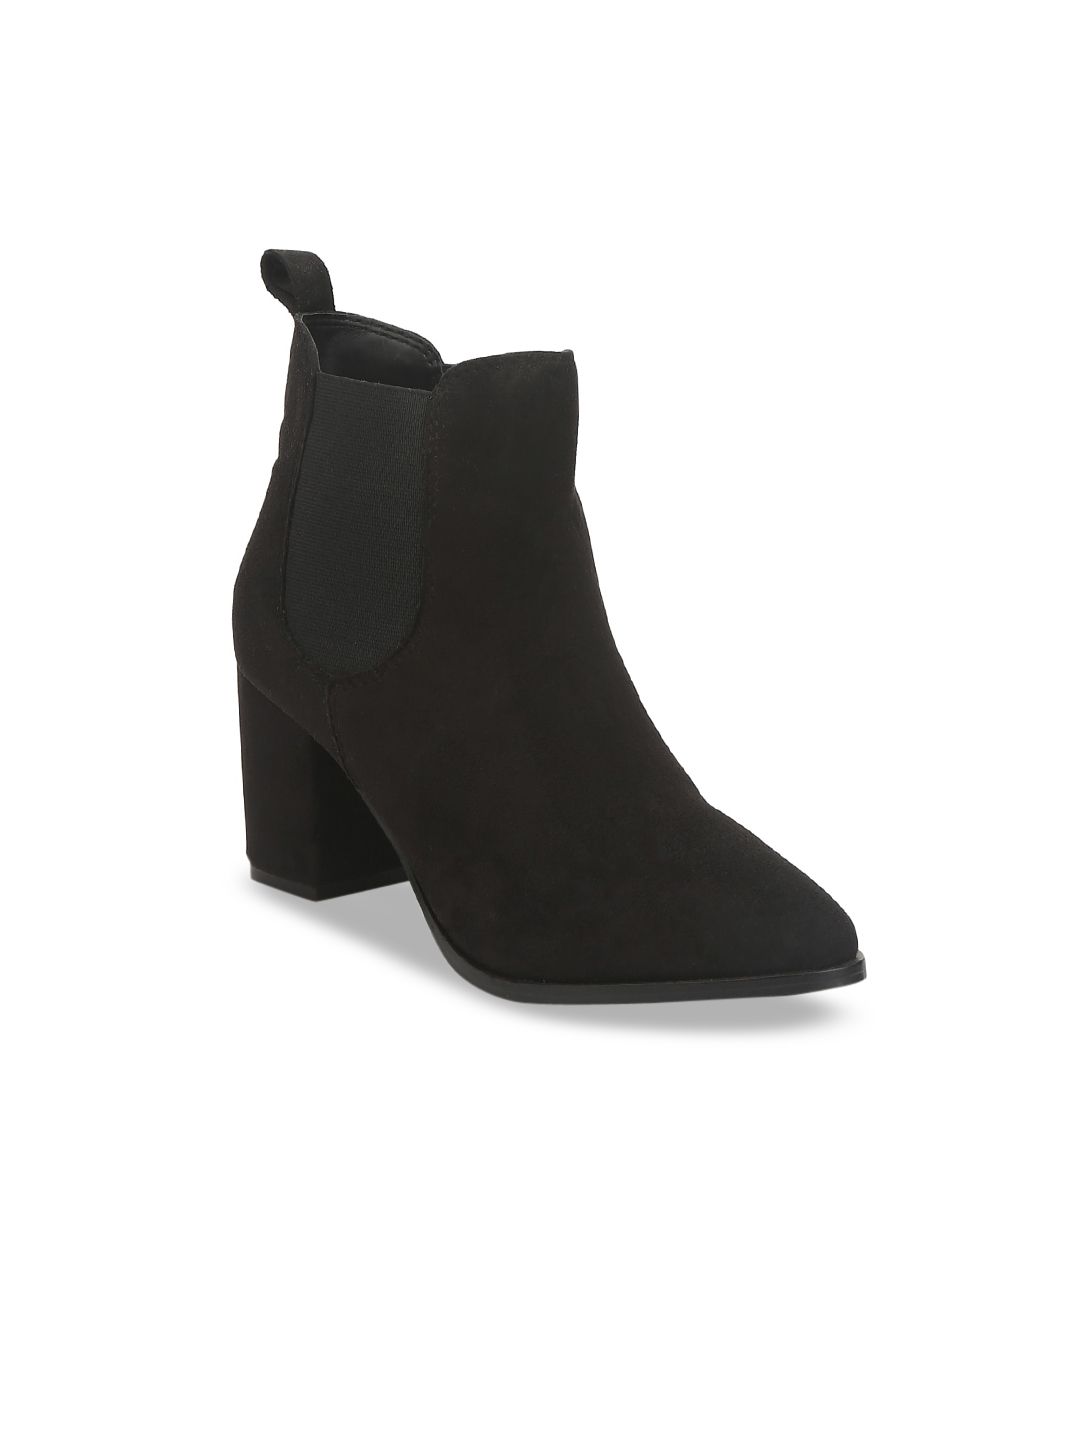 Truffle Collection Women Black Solid Suede Heeled Boots Price in India